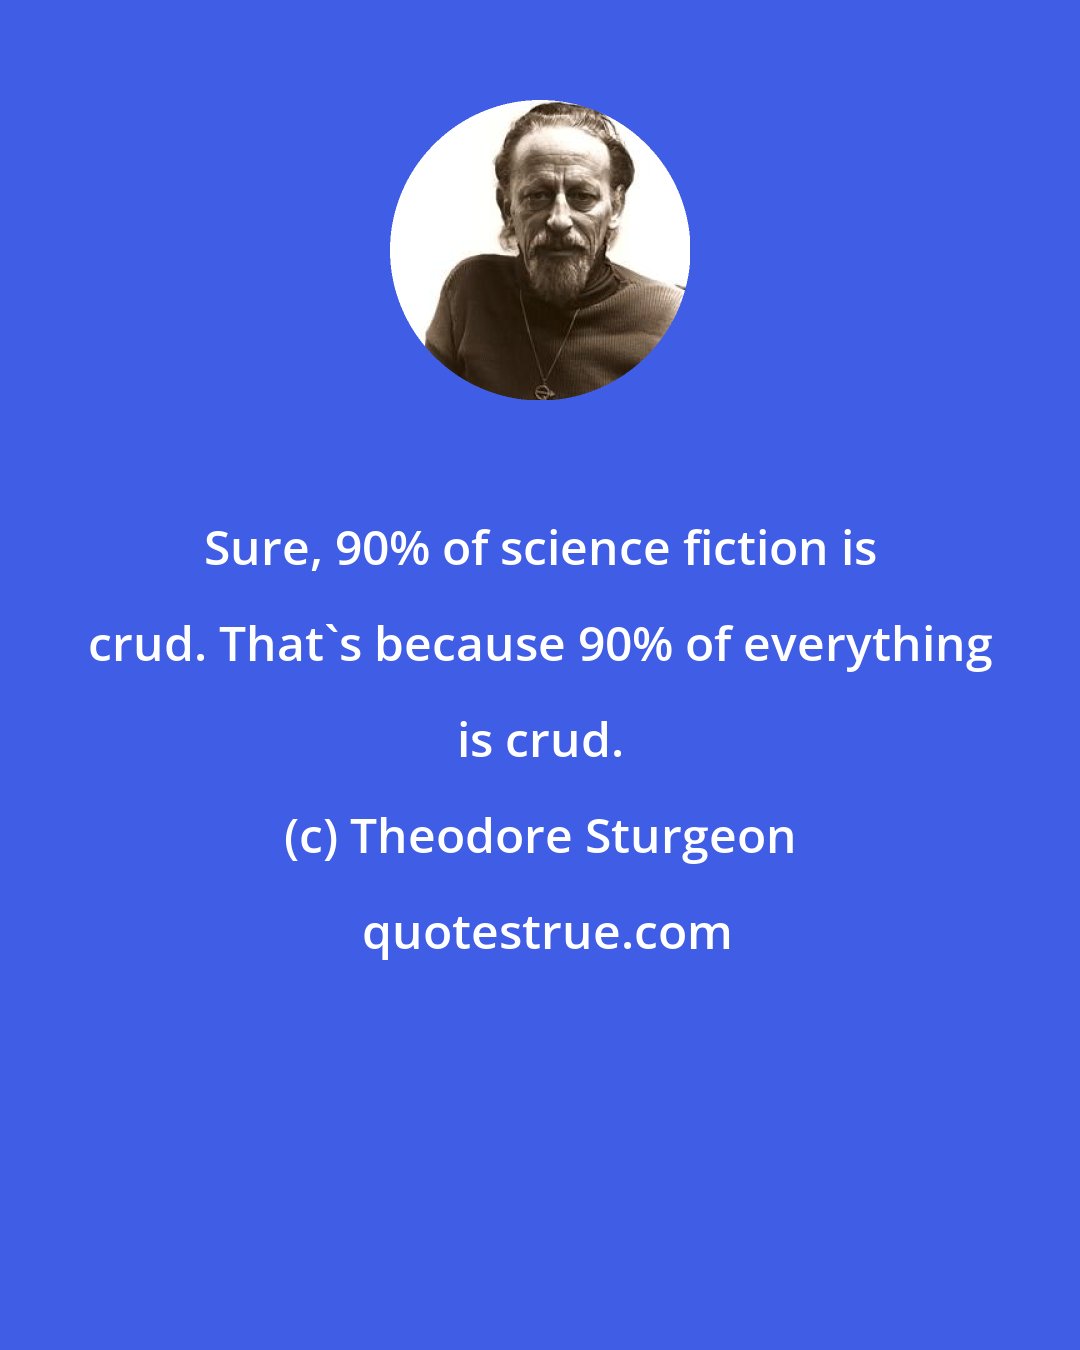 Theodore Sturgeon: Sure, 90% of science fiction is crud. That's because 90% of everything is crud.